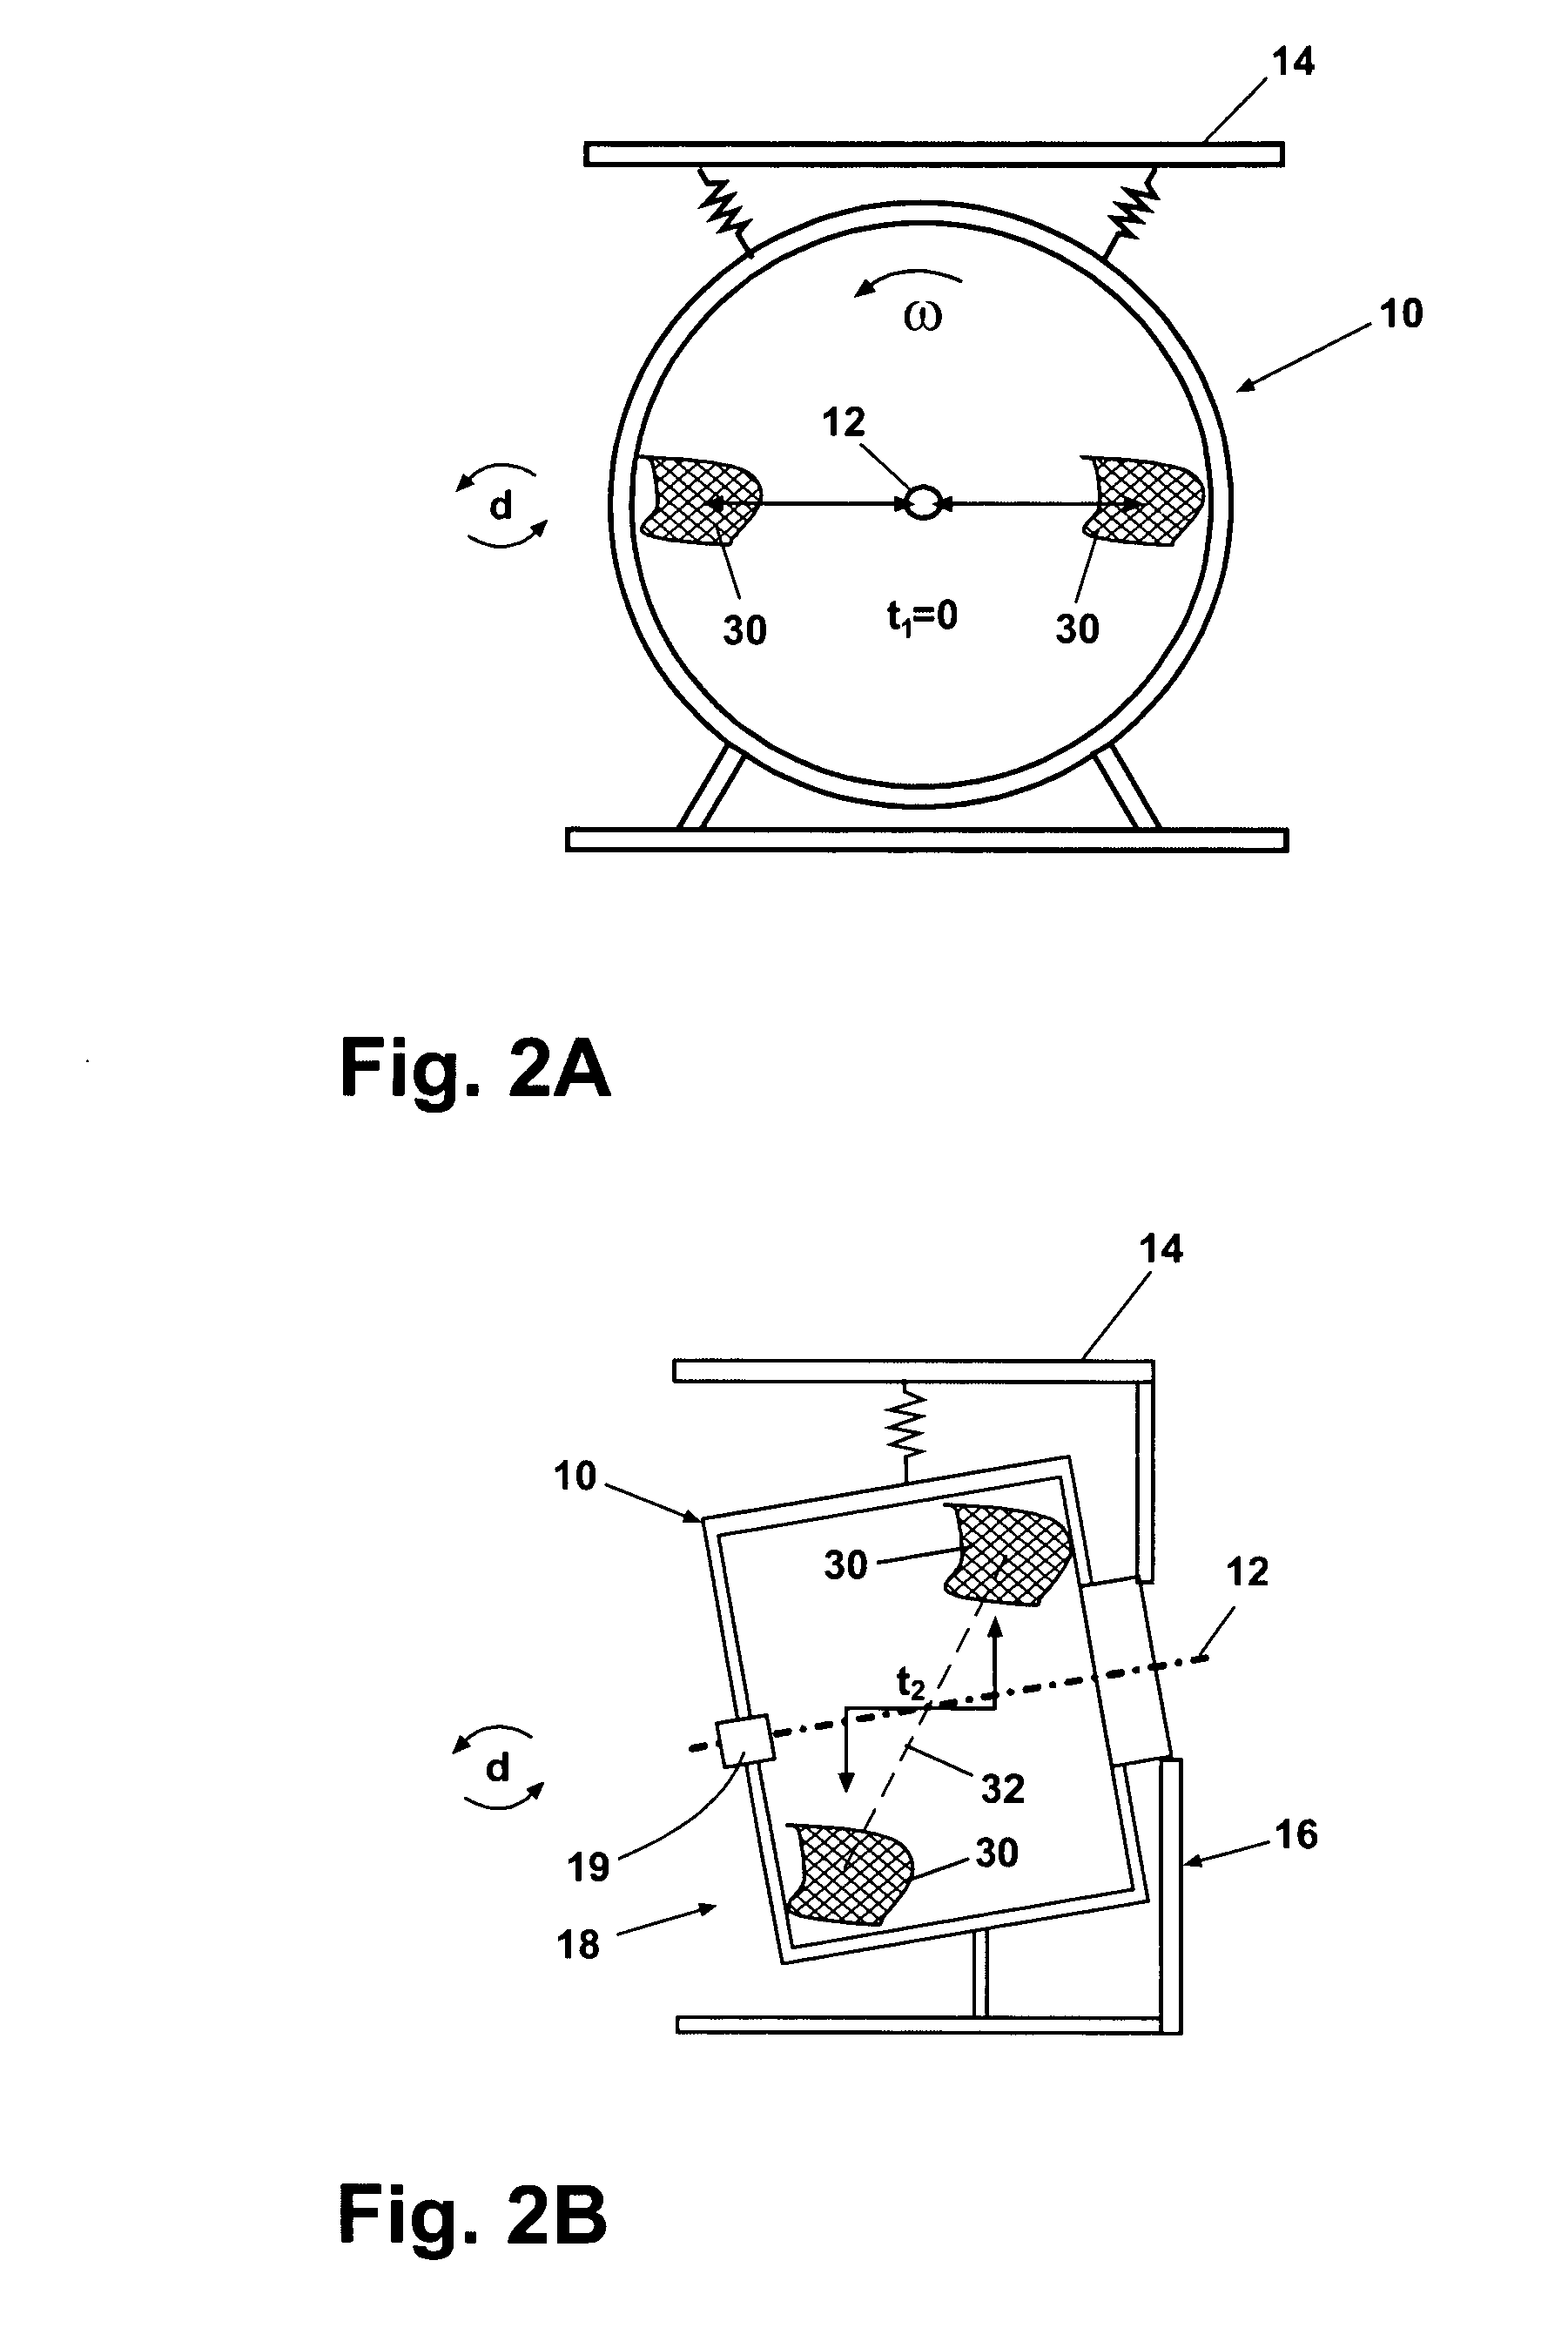 Method and apparatus for monitoring load size and load imbalance in washing machine